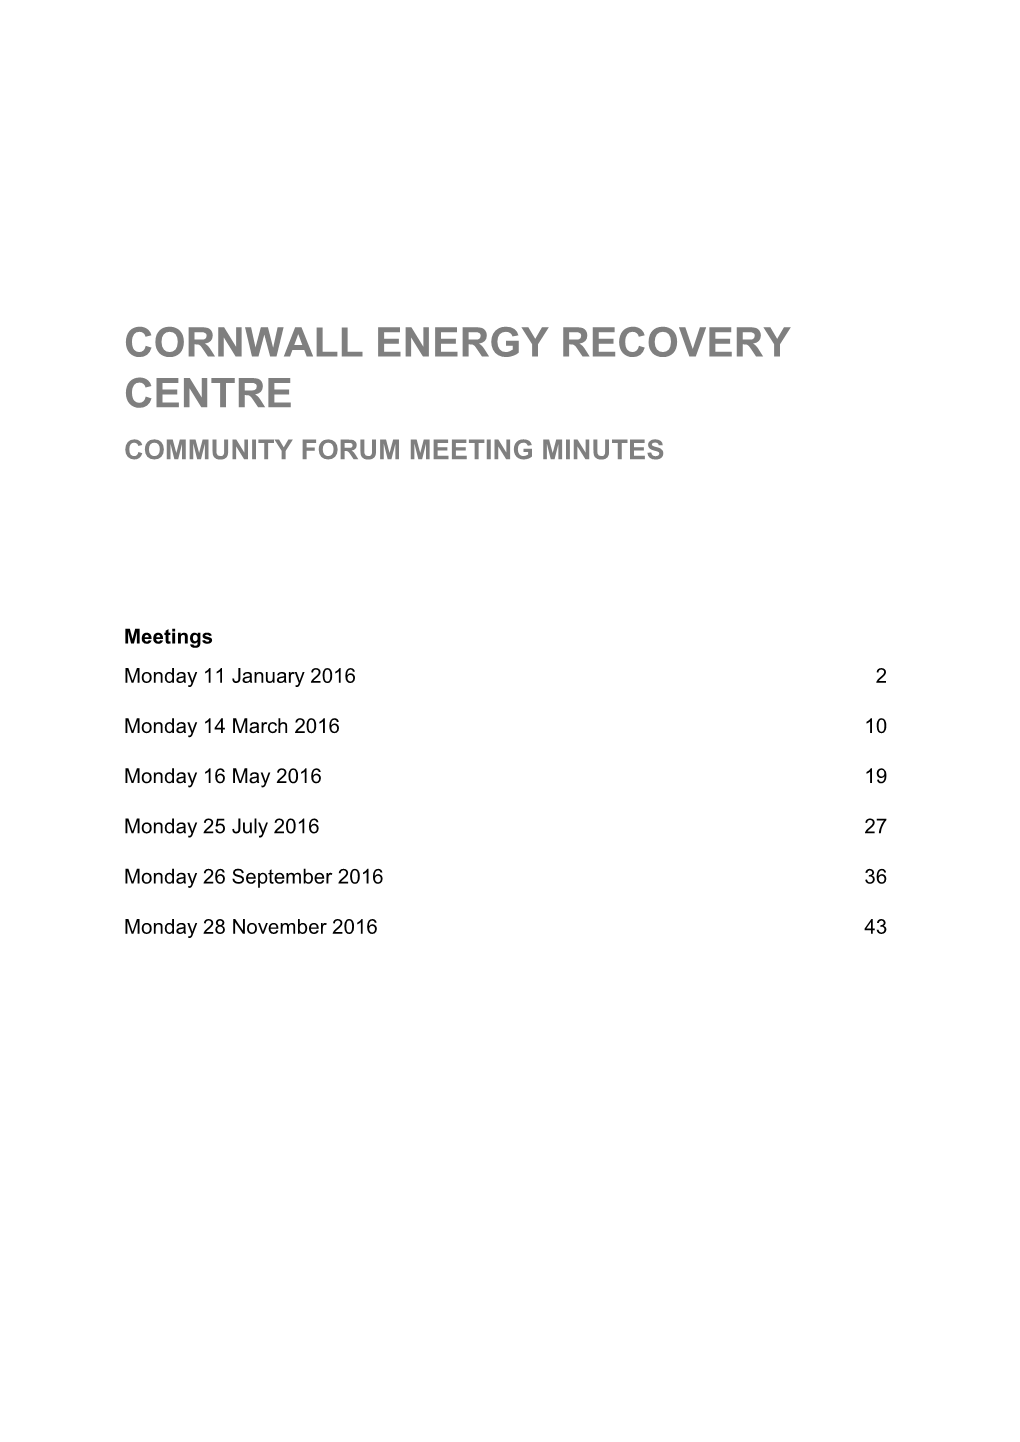 Cornwall Energy Recovery Centre Community Forum Meeting Minutes